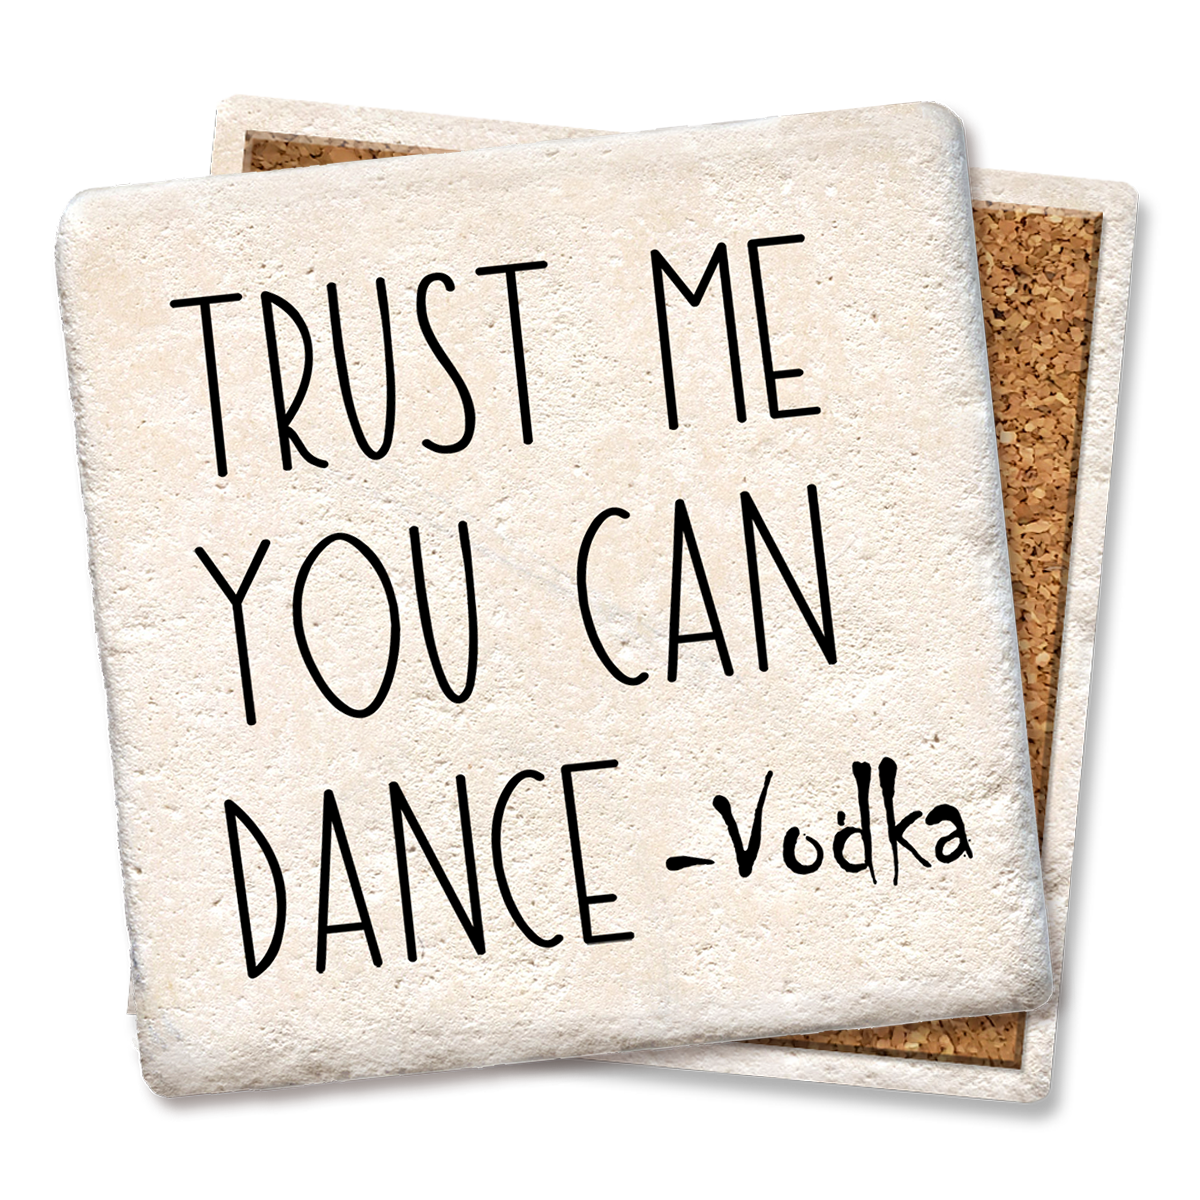 "Trust Me you Can Dance -Vodka" Coaster  Tipsy Coasters & Gifts   